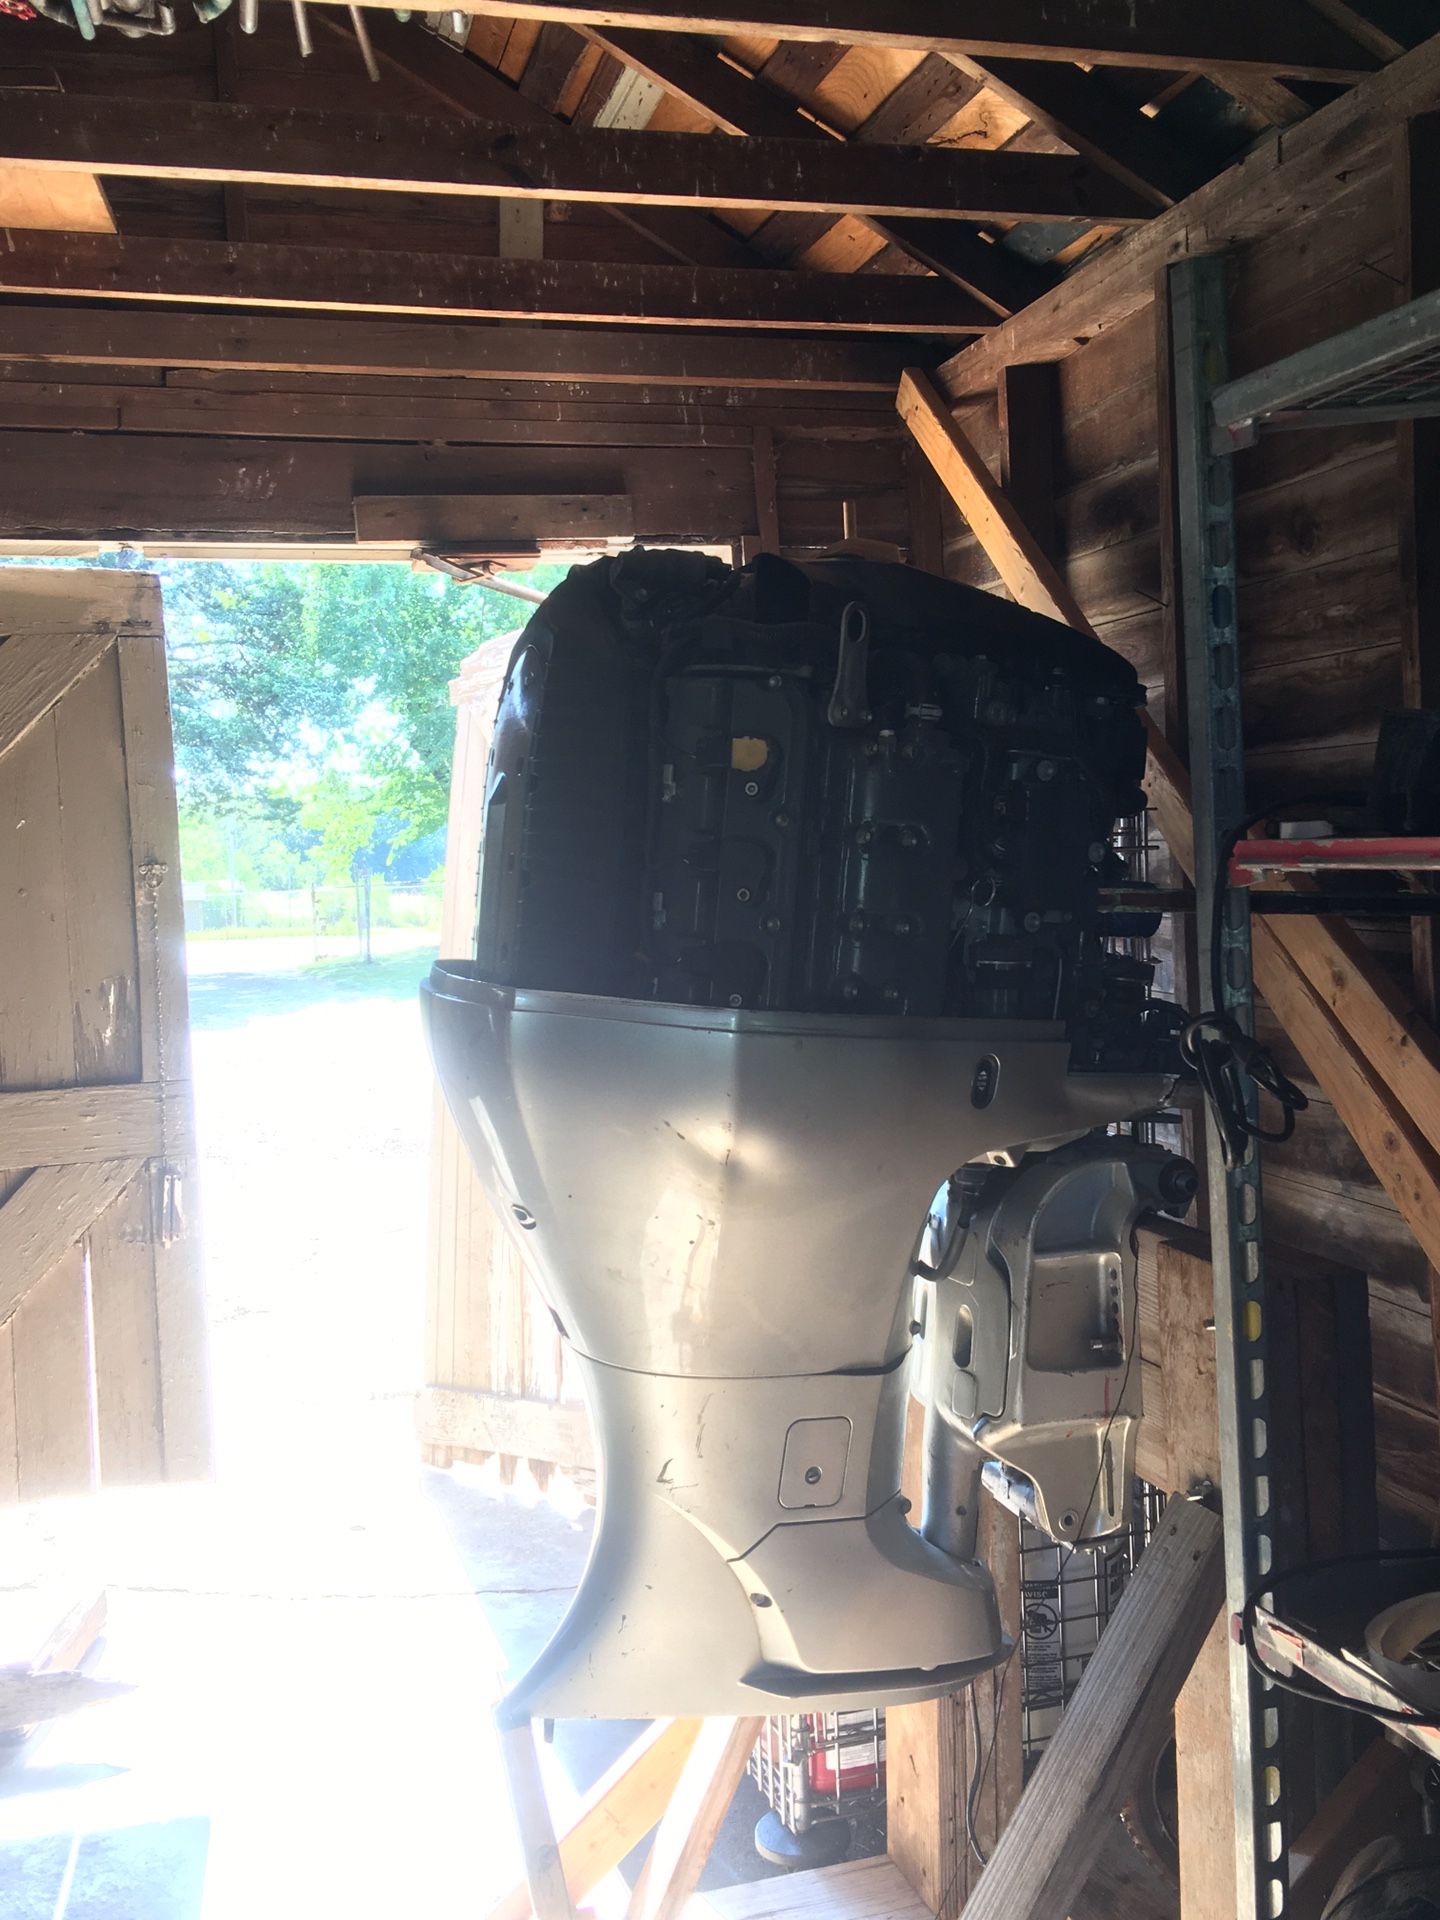 225 BF225 v-tec Outboard motor Like new Low HOURS